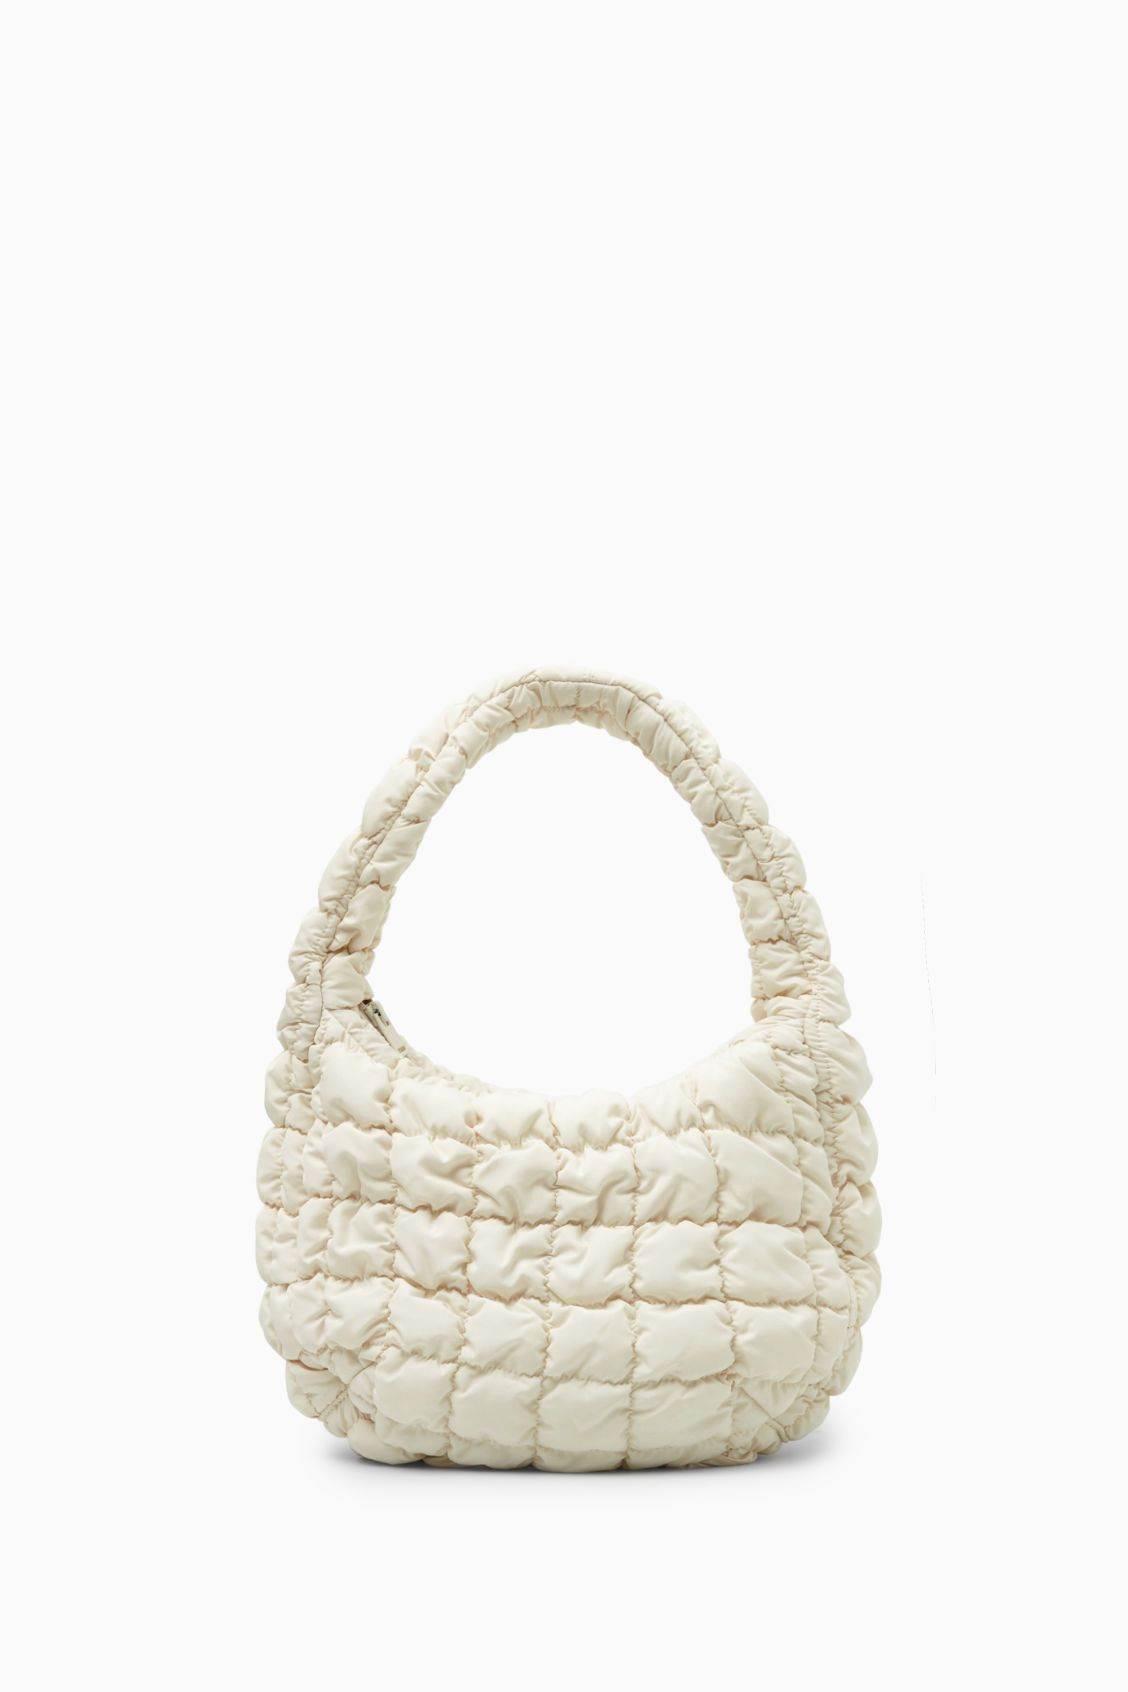 COS Quilted Bag - Stone - Mini